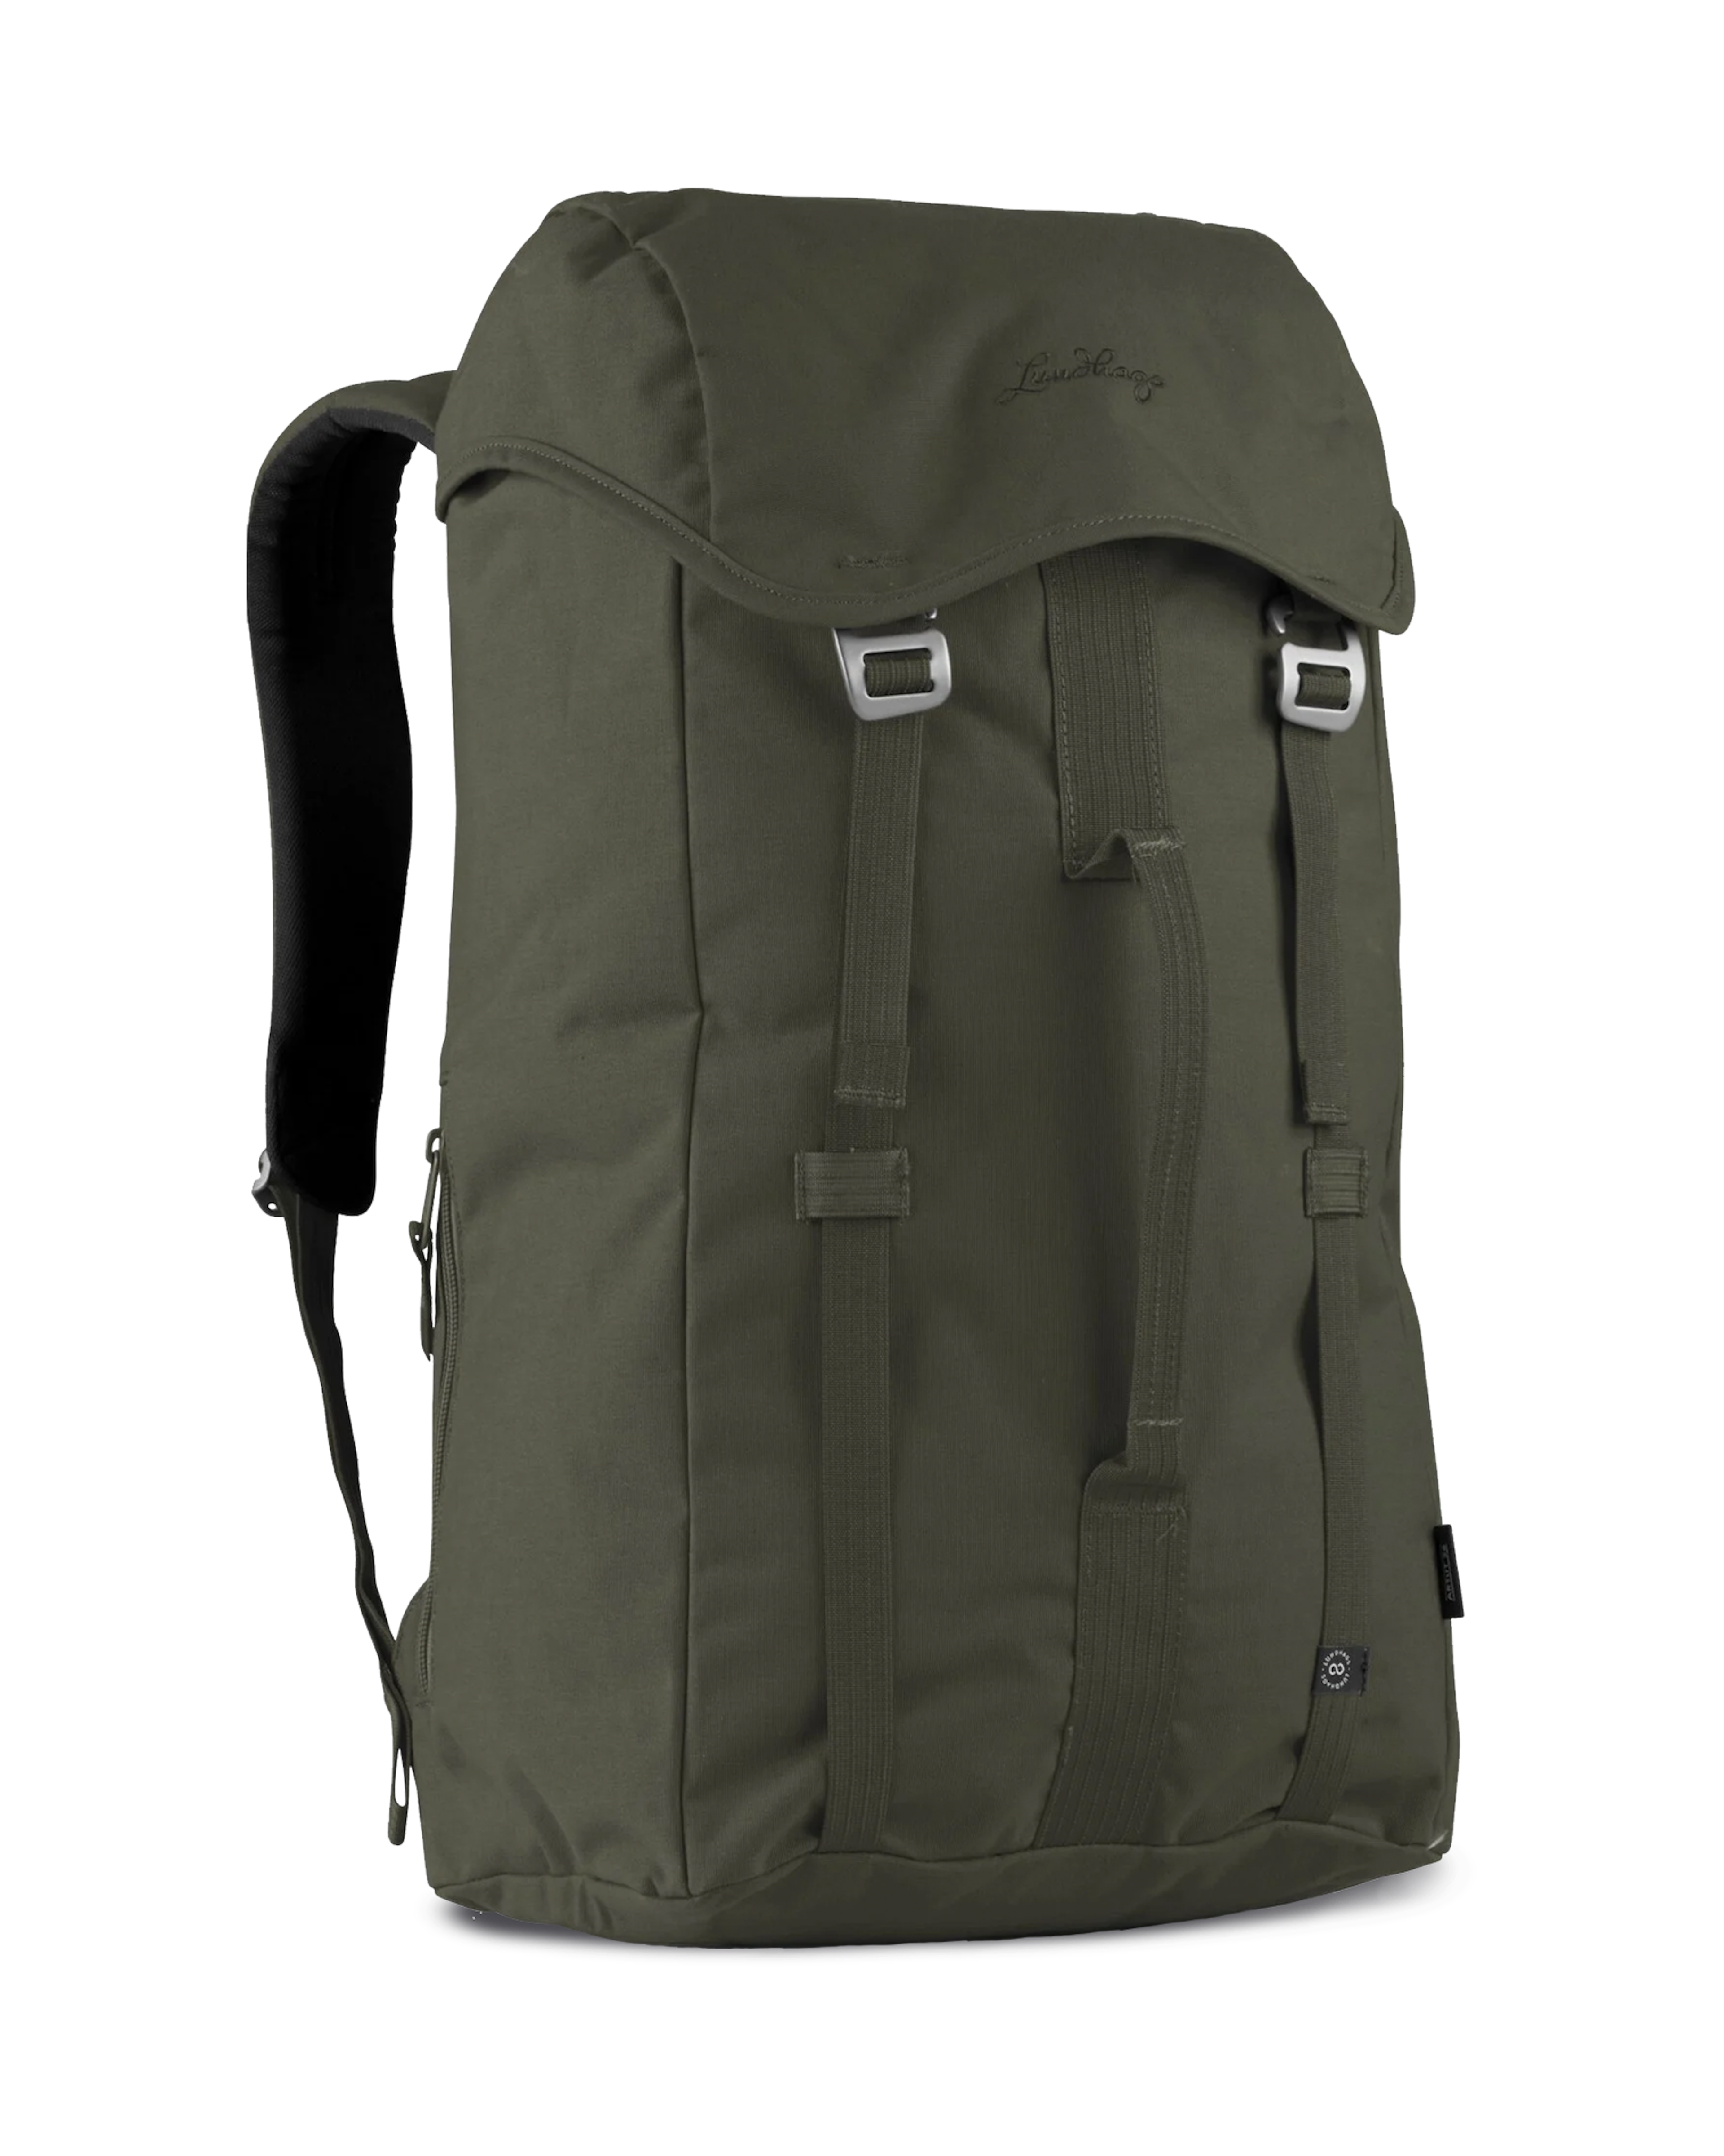 Day Packs | Lundhags